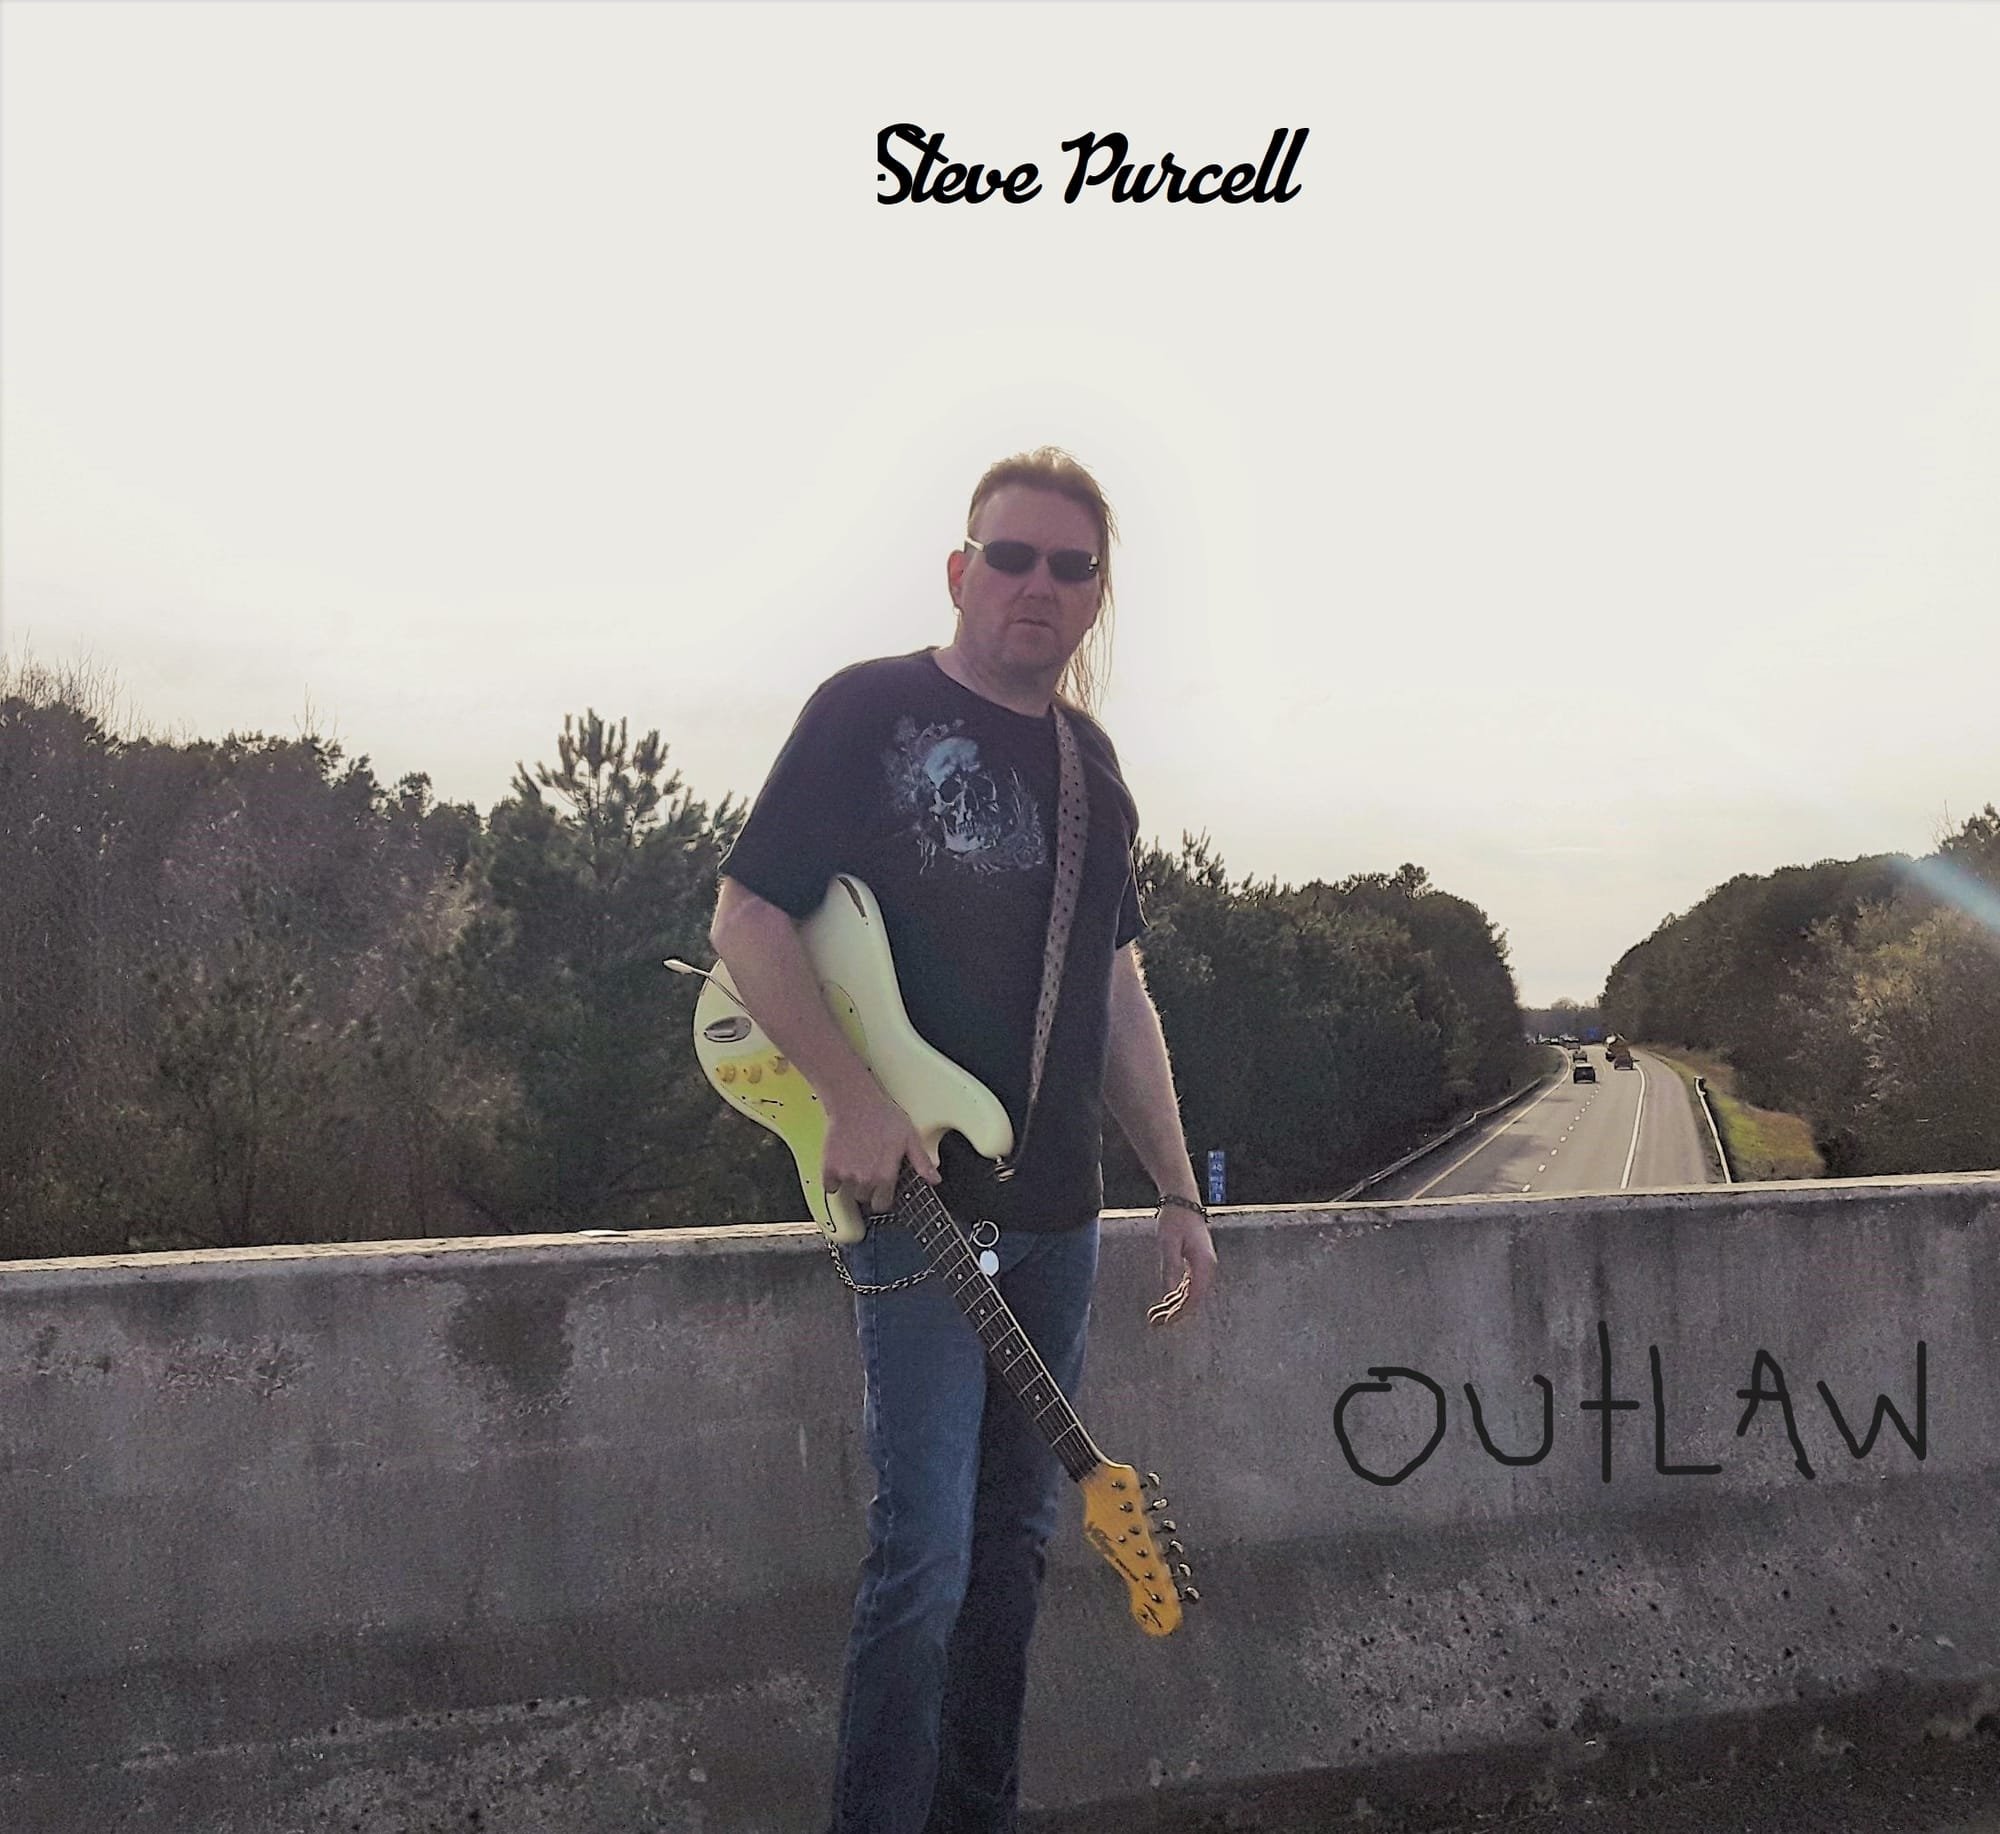 New Single "Outlaw" Released